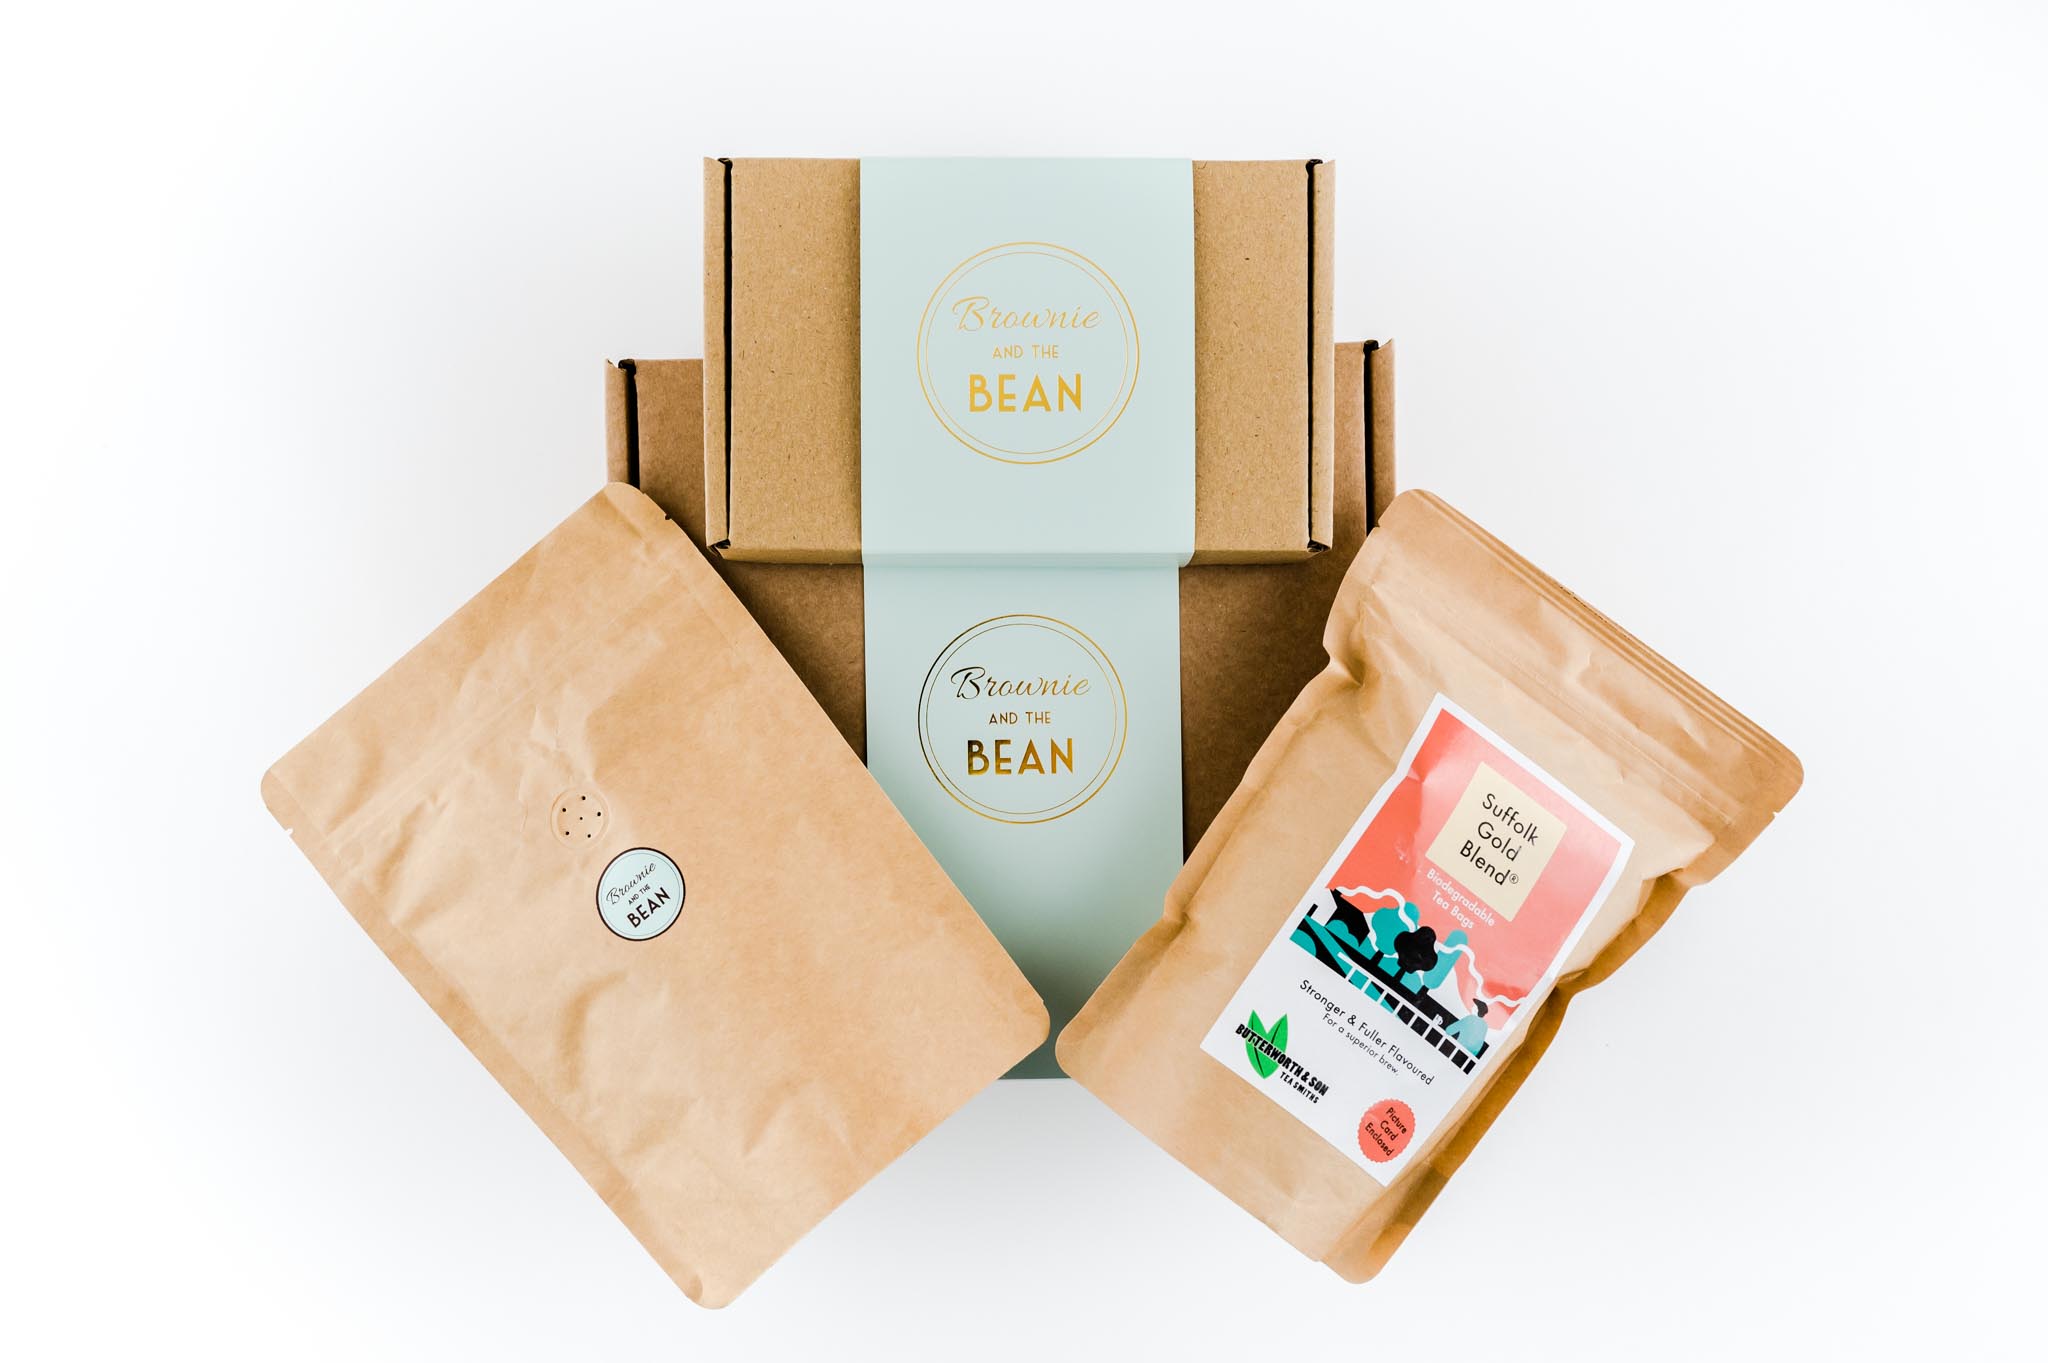 packshot features the best new baby gift ideas. There are two Brownie and the bean boxes on top of one another and a pouch of artisan coffee and tea is fanned out across the top of the shot.